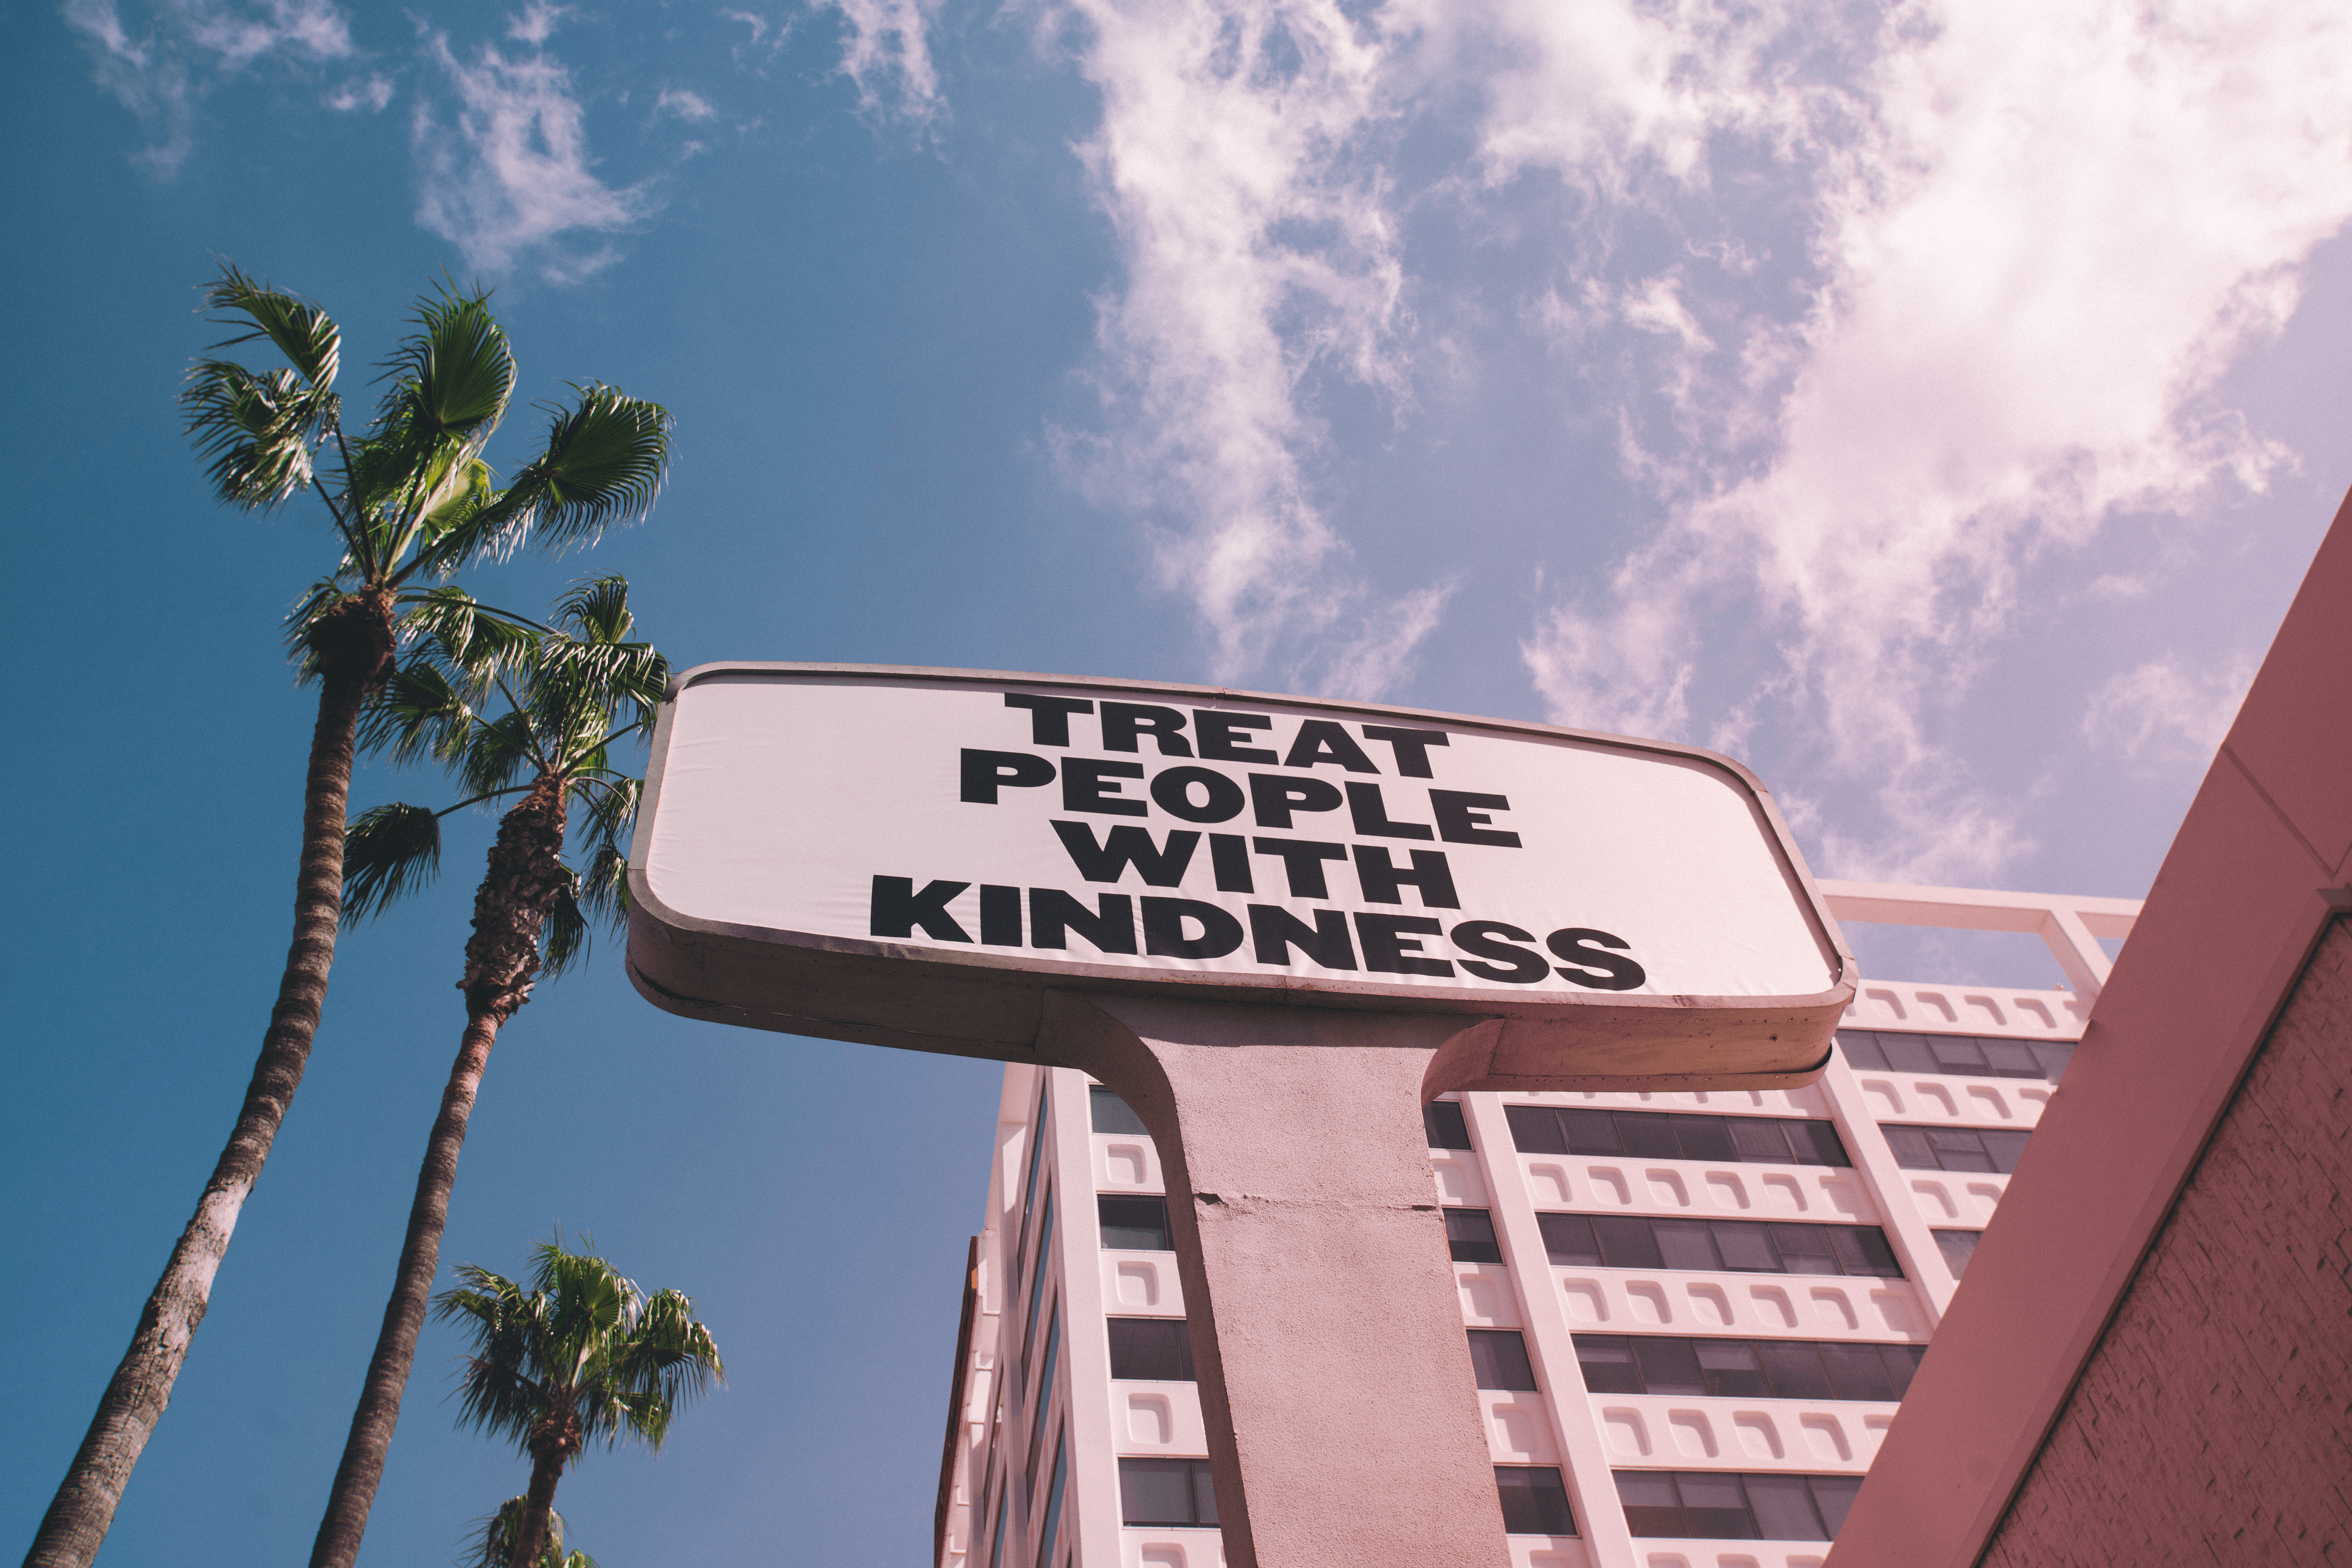 TREAT PEOPLE WITH KINDNESS 